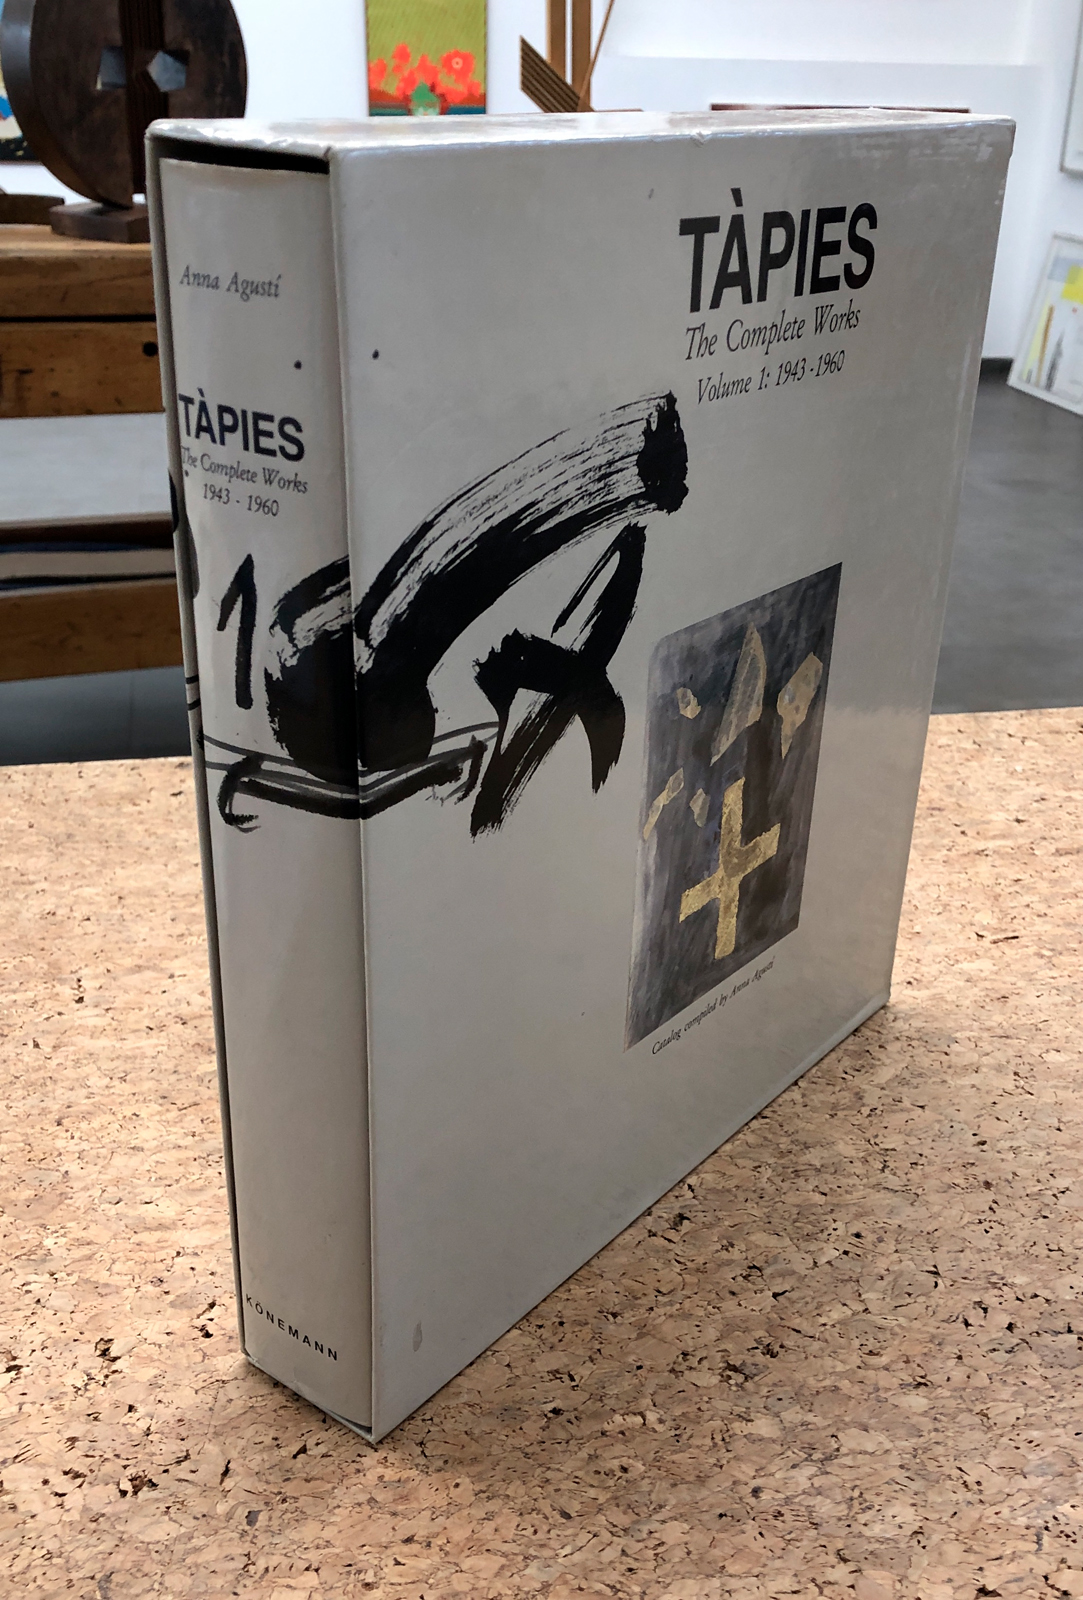 Tàpies : the complete works, Volume 1 1943-1960